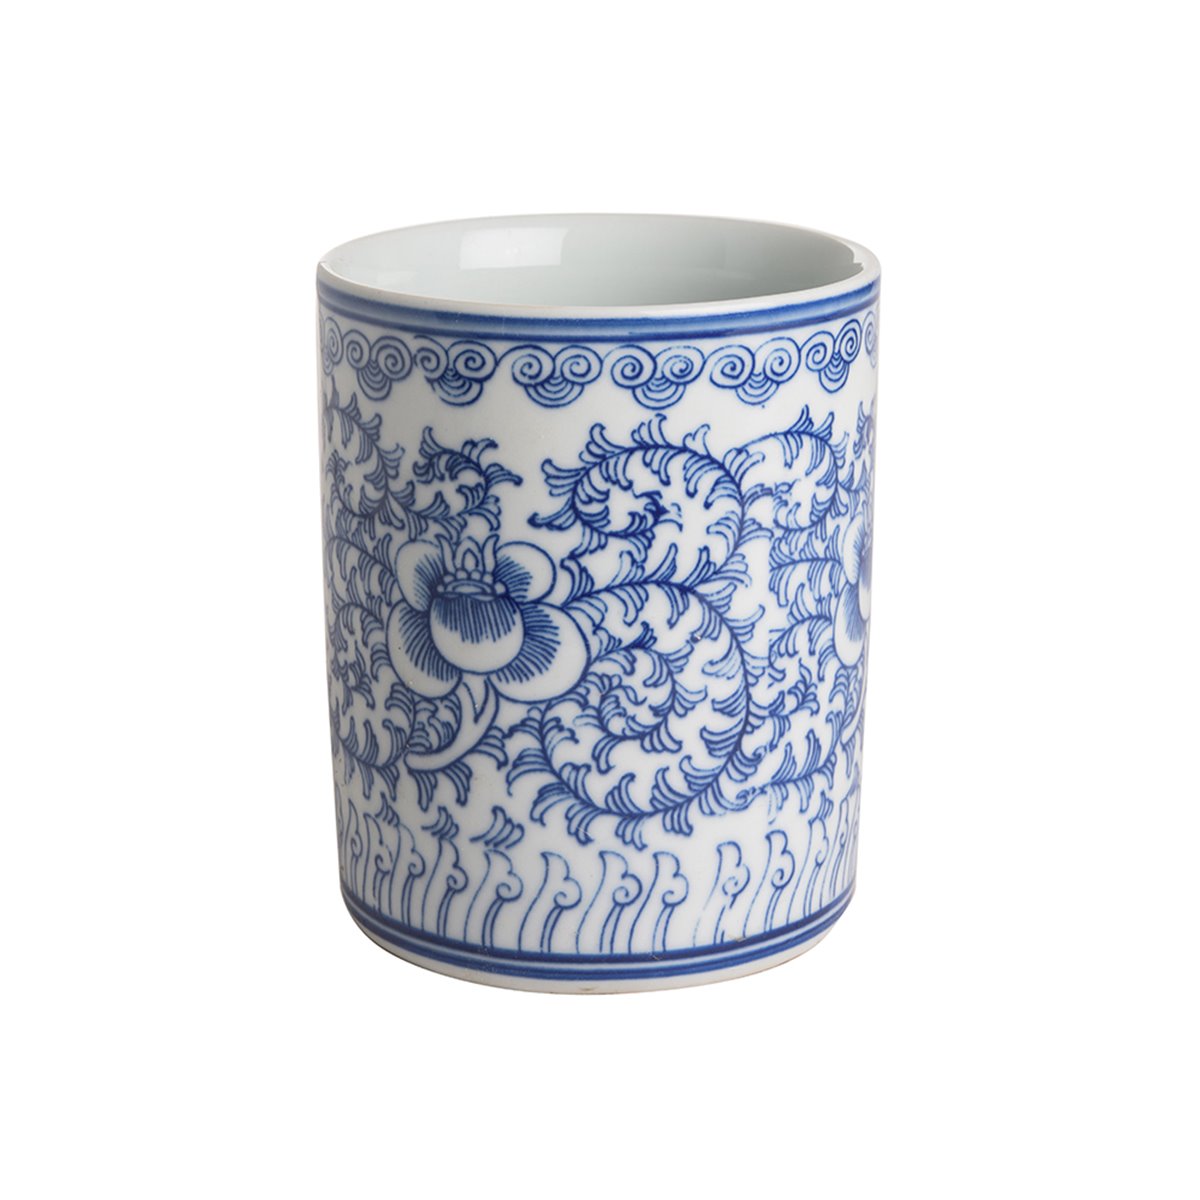 Asia Tides Porcelain Orchid Pot - Blue and White Collection